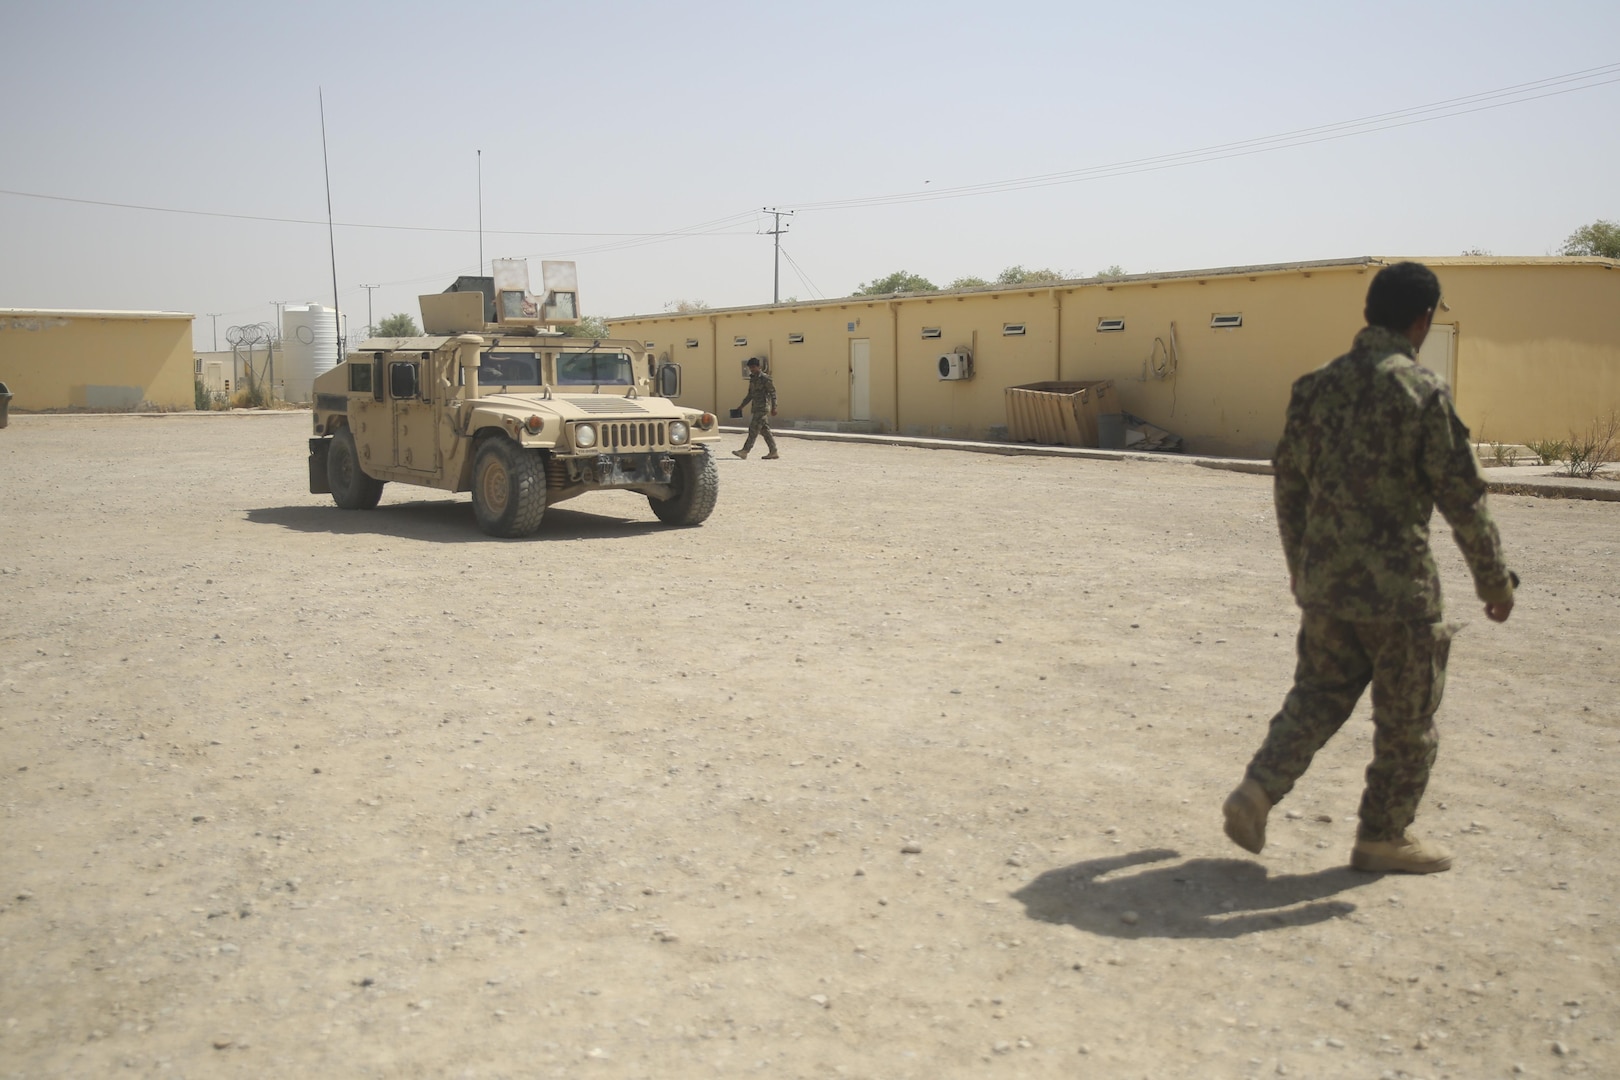 Afghan National Army soldiers with 215th Corps check for notional improvised explosive devices around a Humvee at Camp Shorabak, Afghanistan, July 13, 2017. Several U.S. Marine counter IED advisors recently began a route clearance course with approximately 70 Afghan soldiers, which is designed to enhance the maneuverability of 215th Corps units, supplies and civilians throughout Helmand Province. (U.S. Marine Corps photo by Sgt. Lucas Hopkins)